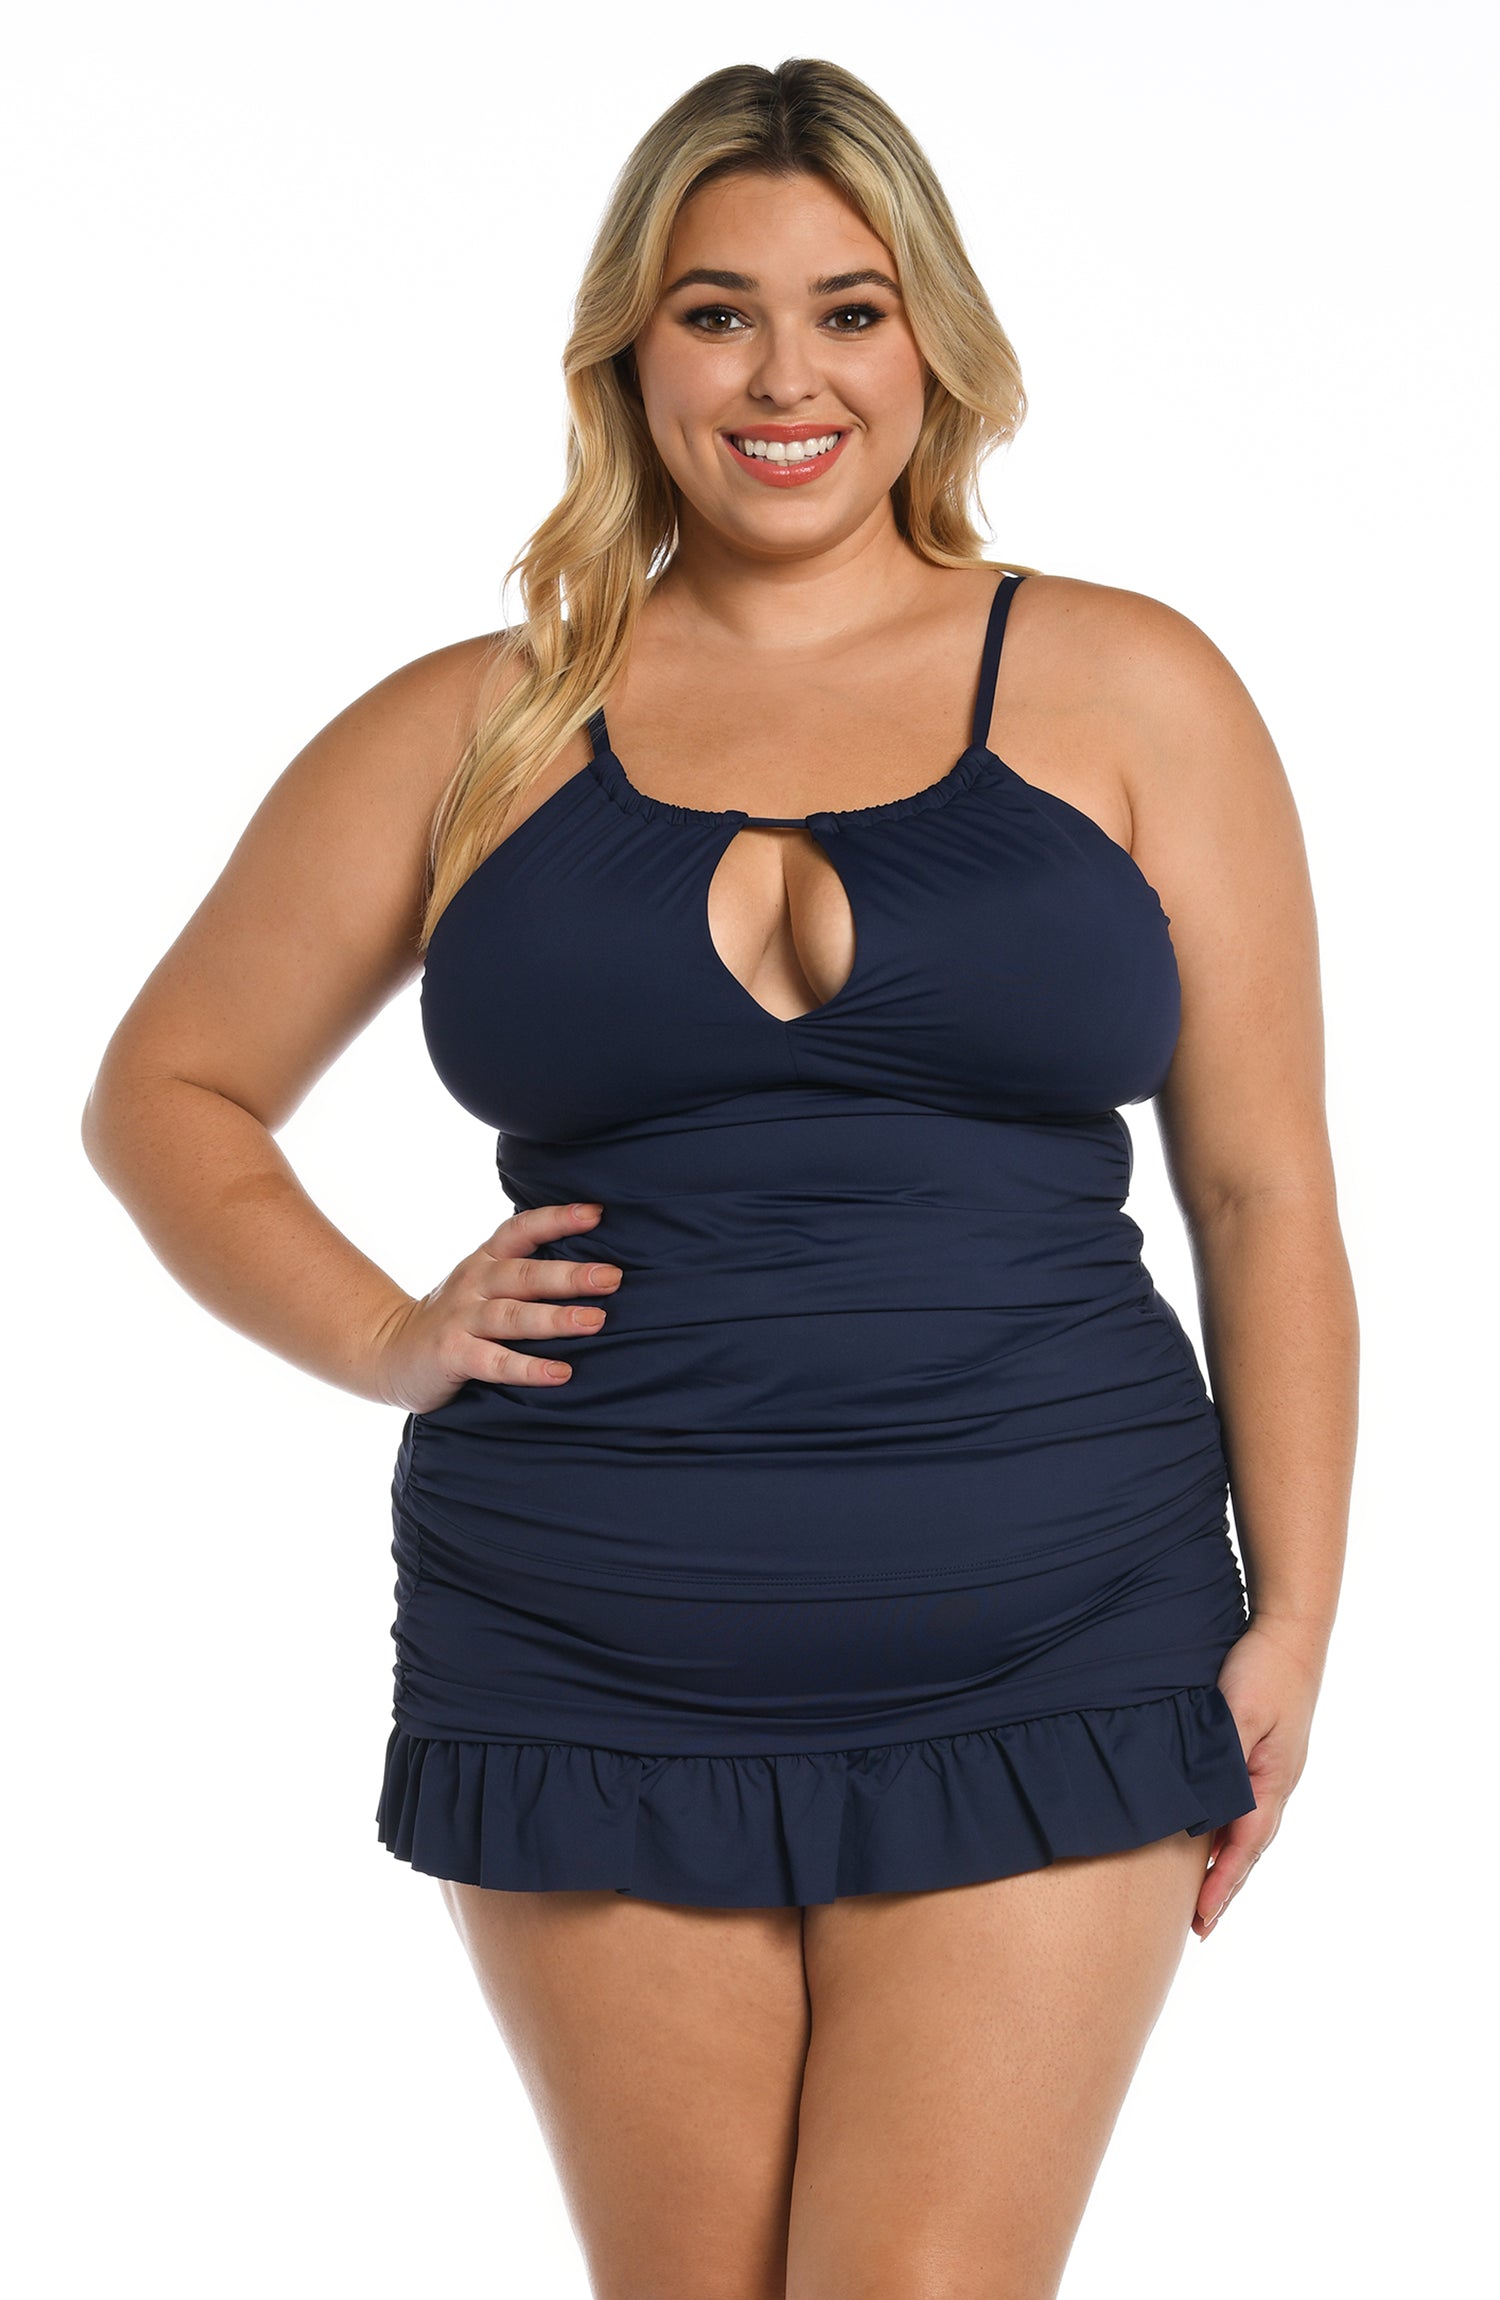 Model is wearing a indigo colored keyhole tankini swimsuit top from our Best-Selling Island Goddess collection.